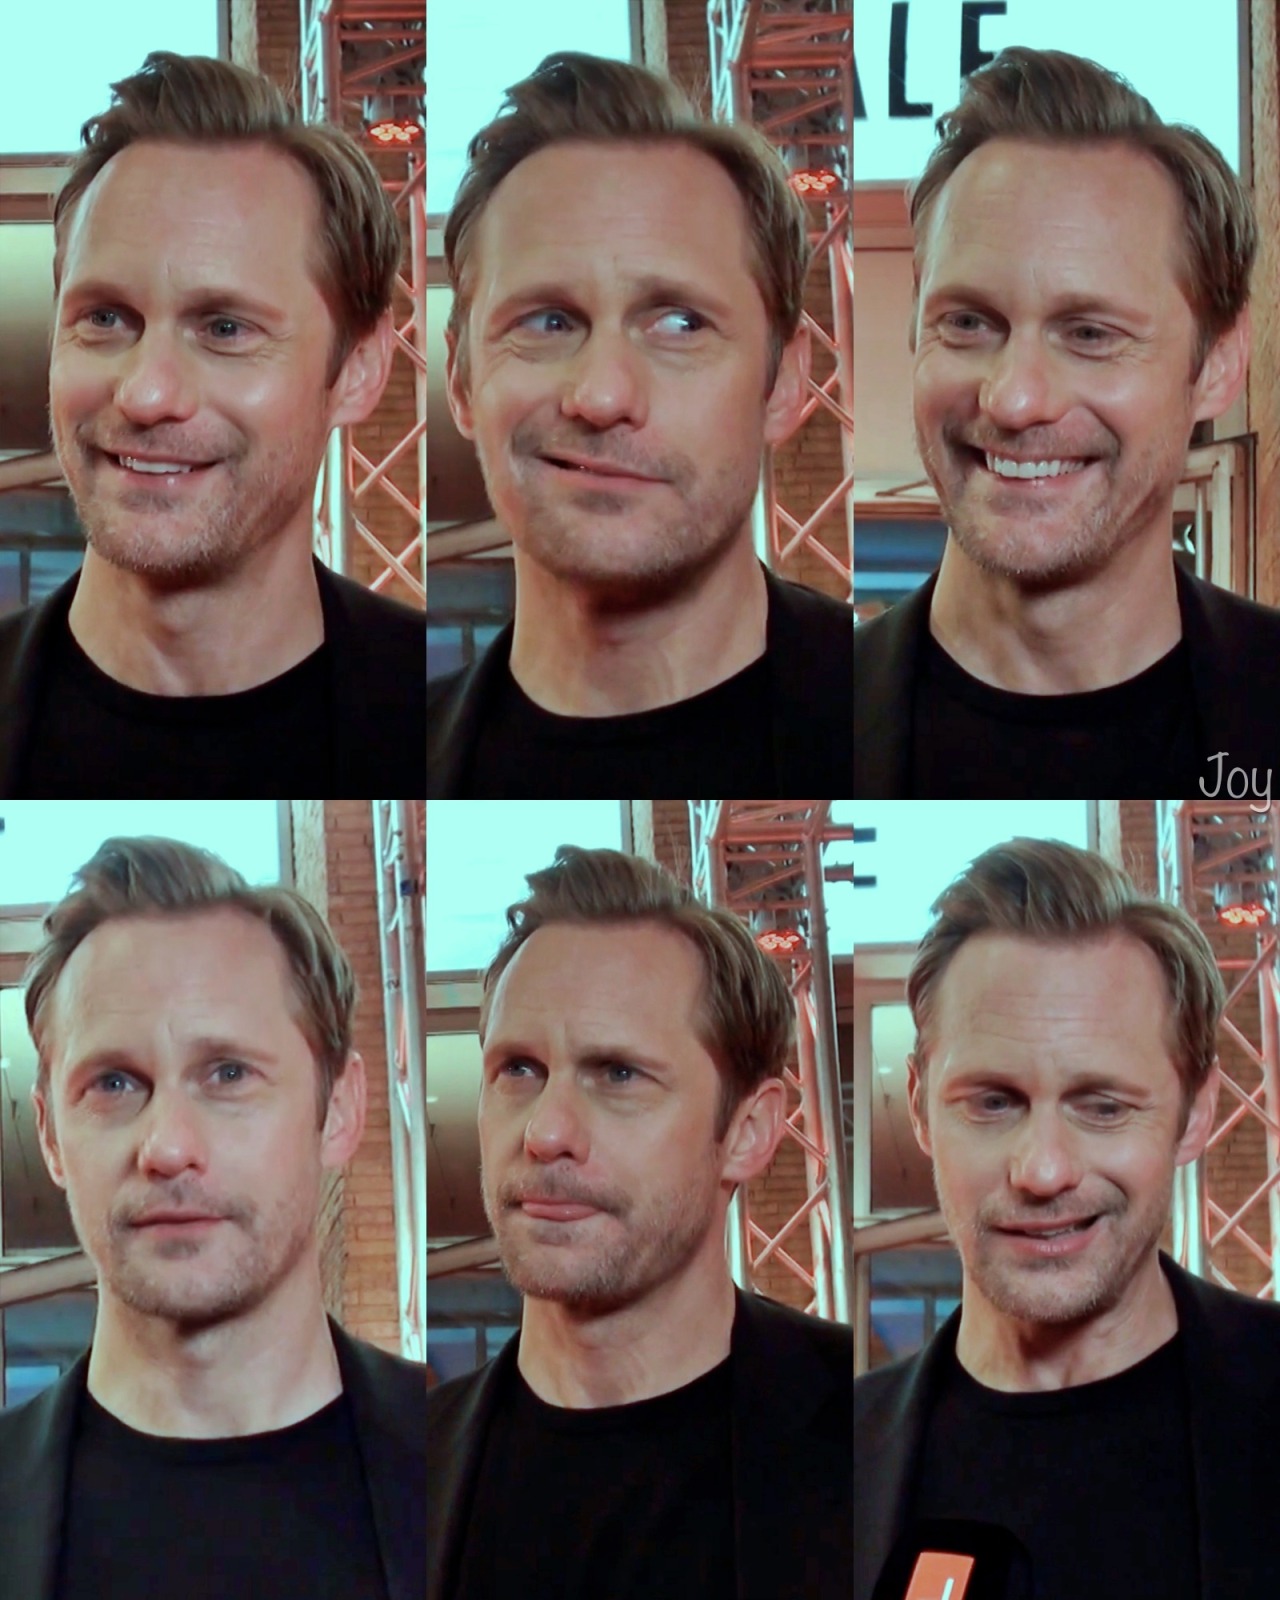 skarsjoy:
“NEW videos of Alexander Skarsgård at Berlinale with his INFINITY POOL cast and crew from CELEBRITY INTERVIEWS Parviz Khosrawi
INFINITY POOL Alexander Skarsgard Interview BERLINALE 2023 Premiere Berlin - funny memories set
Questions:
What...